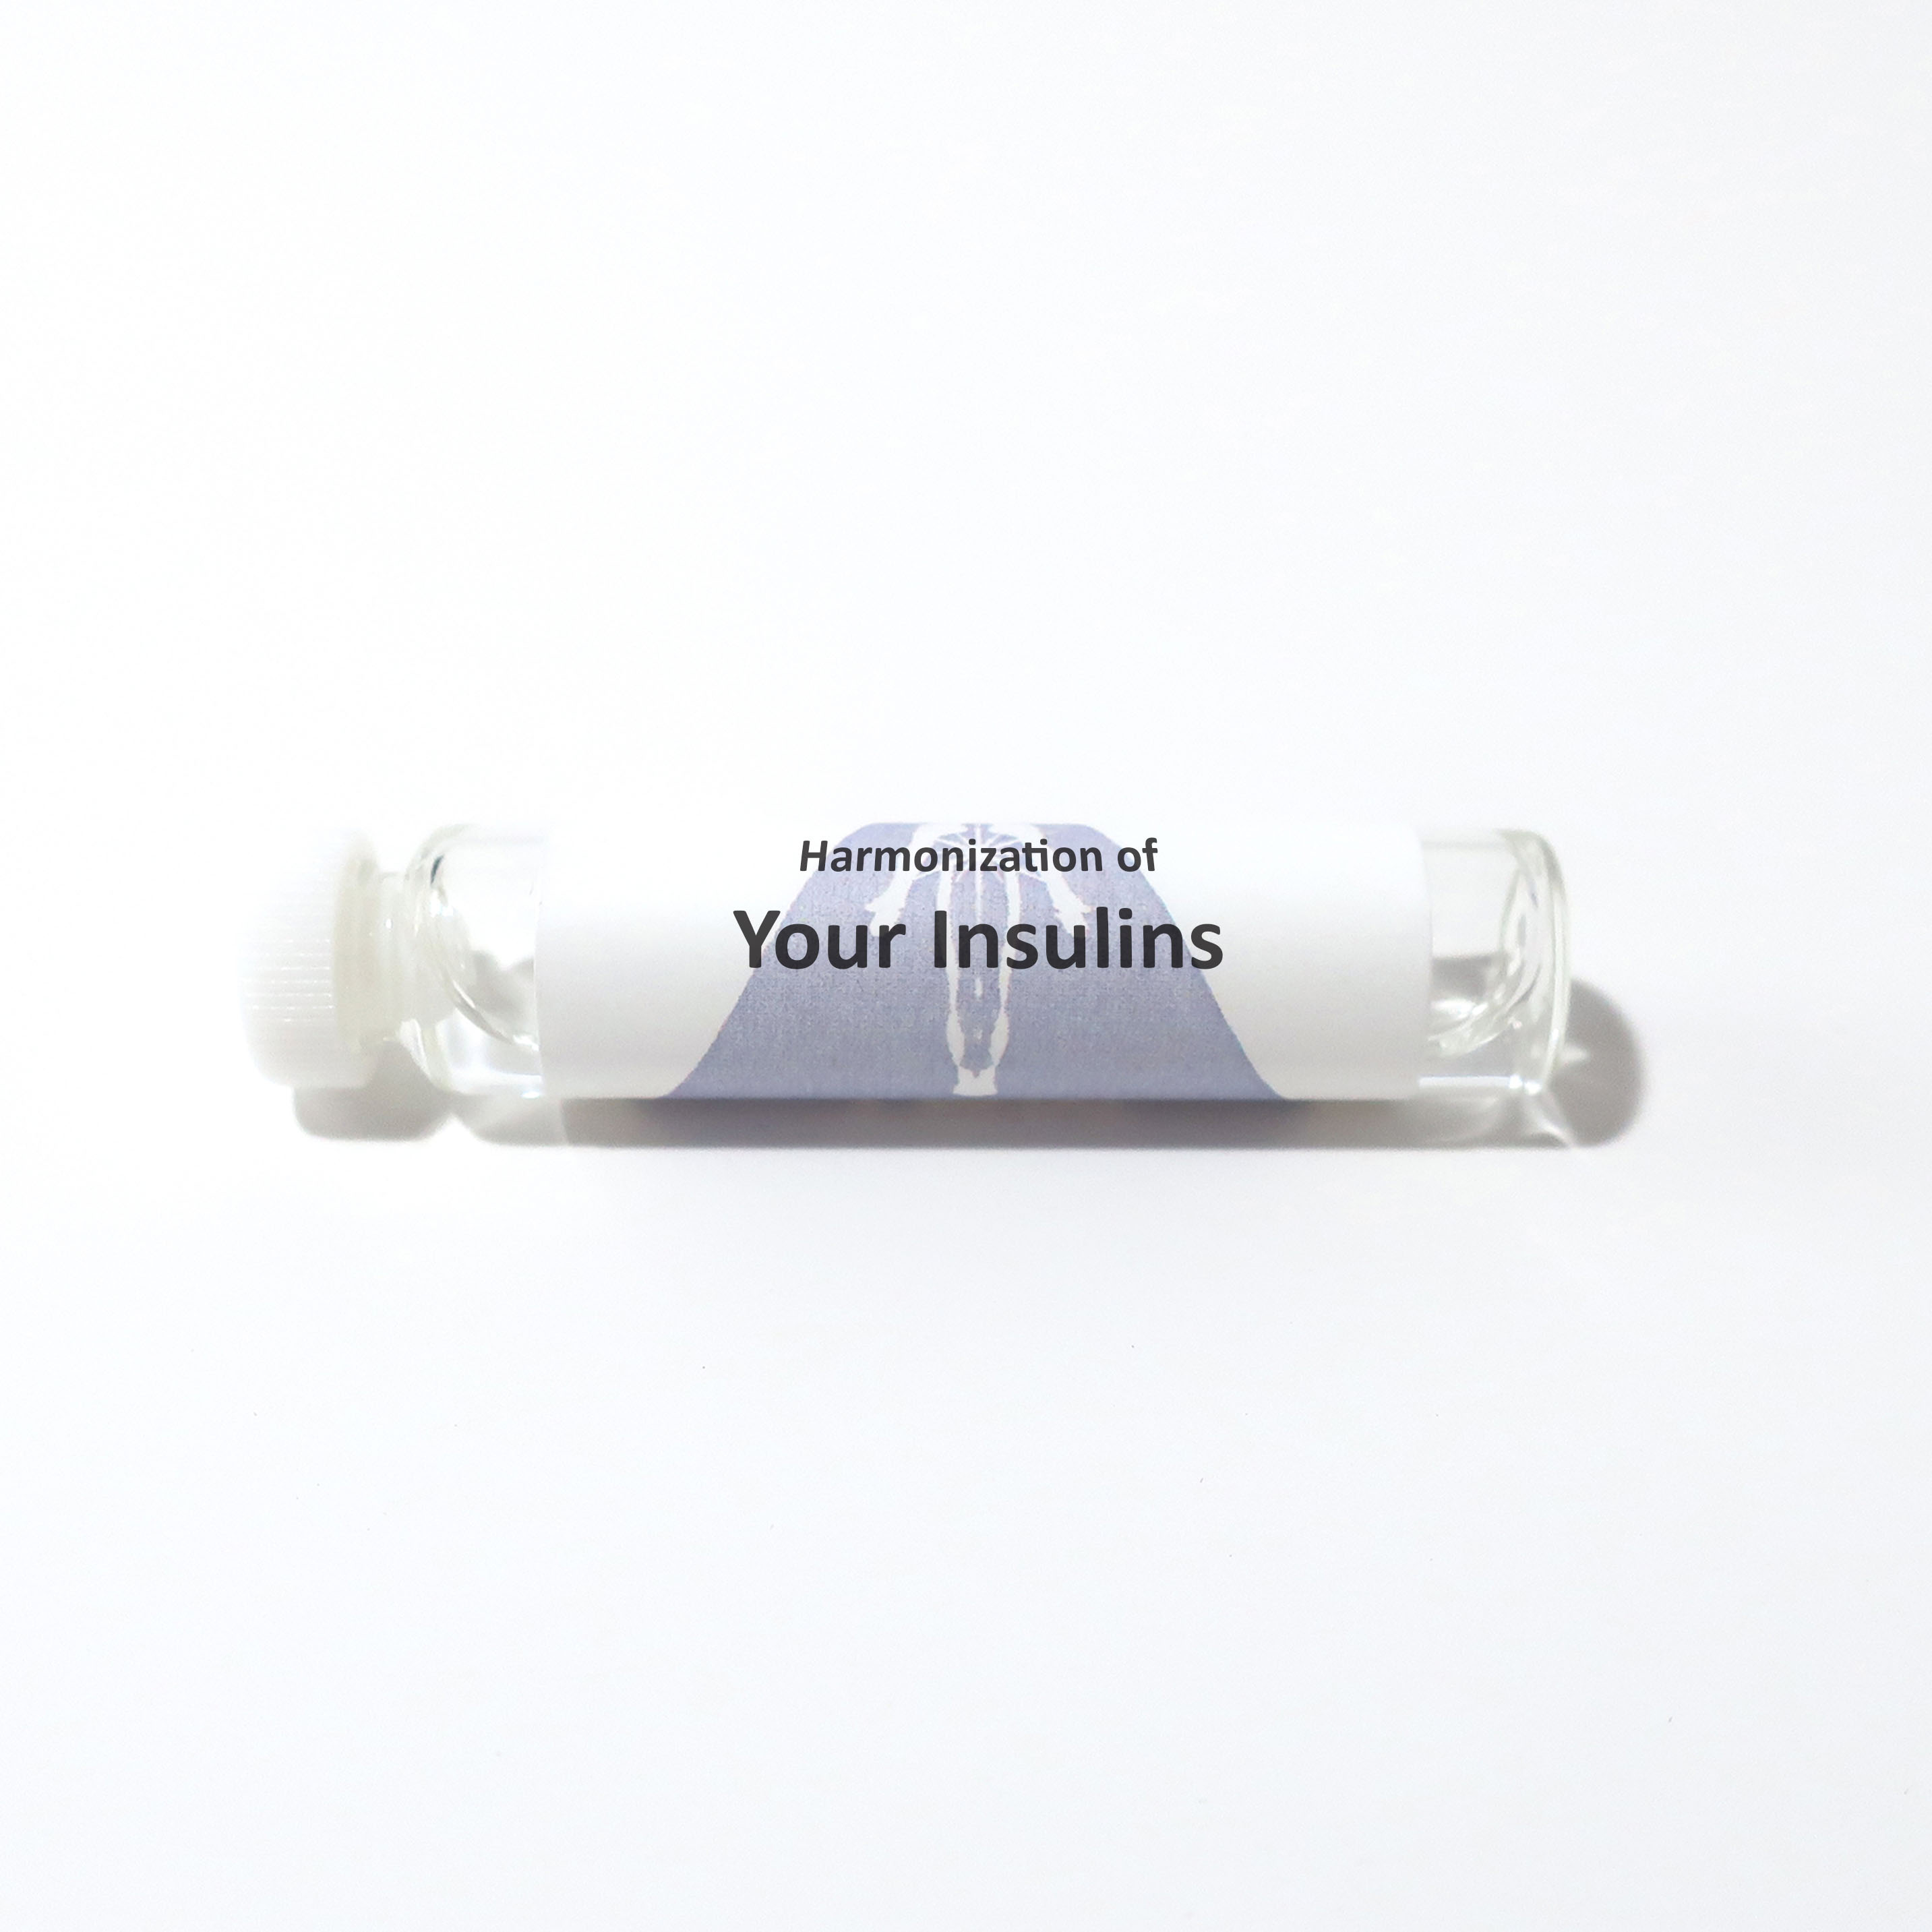 Your Insulins